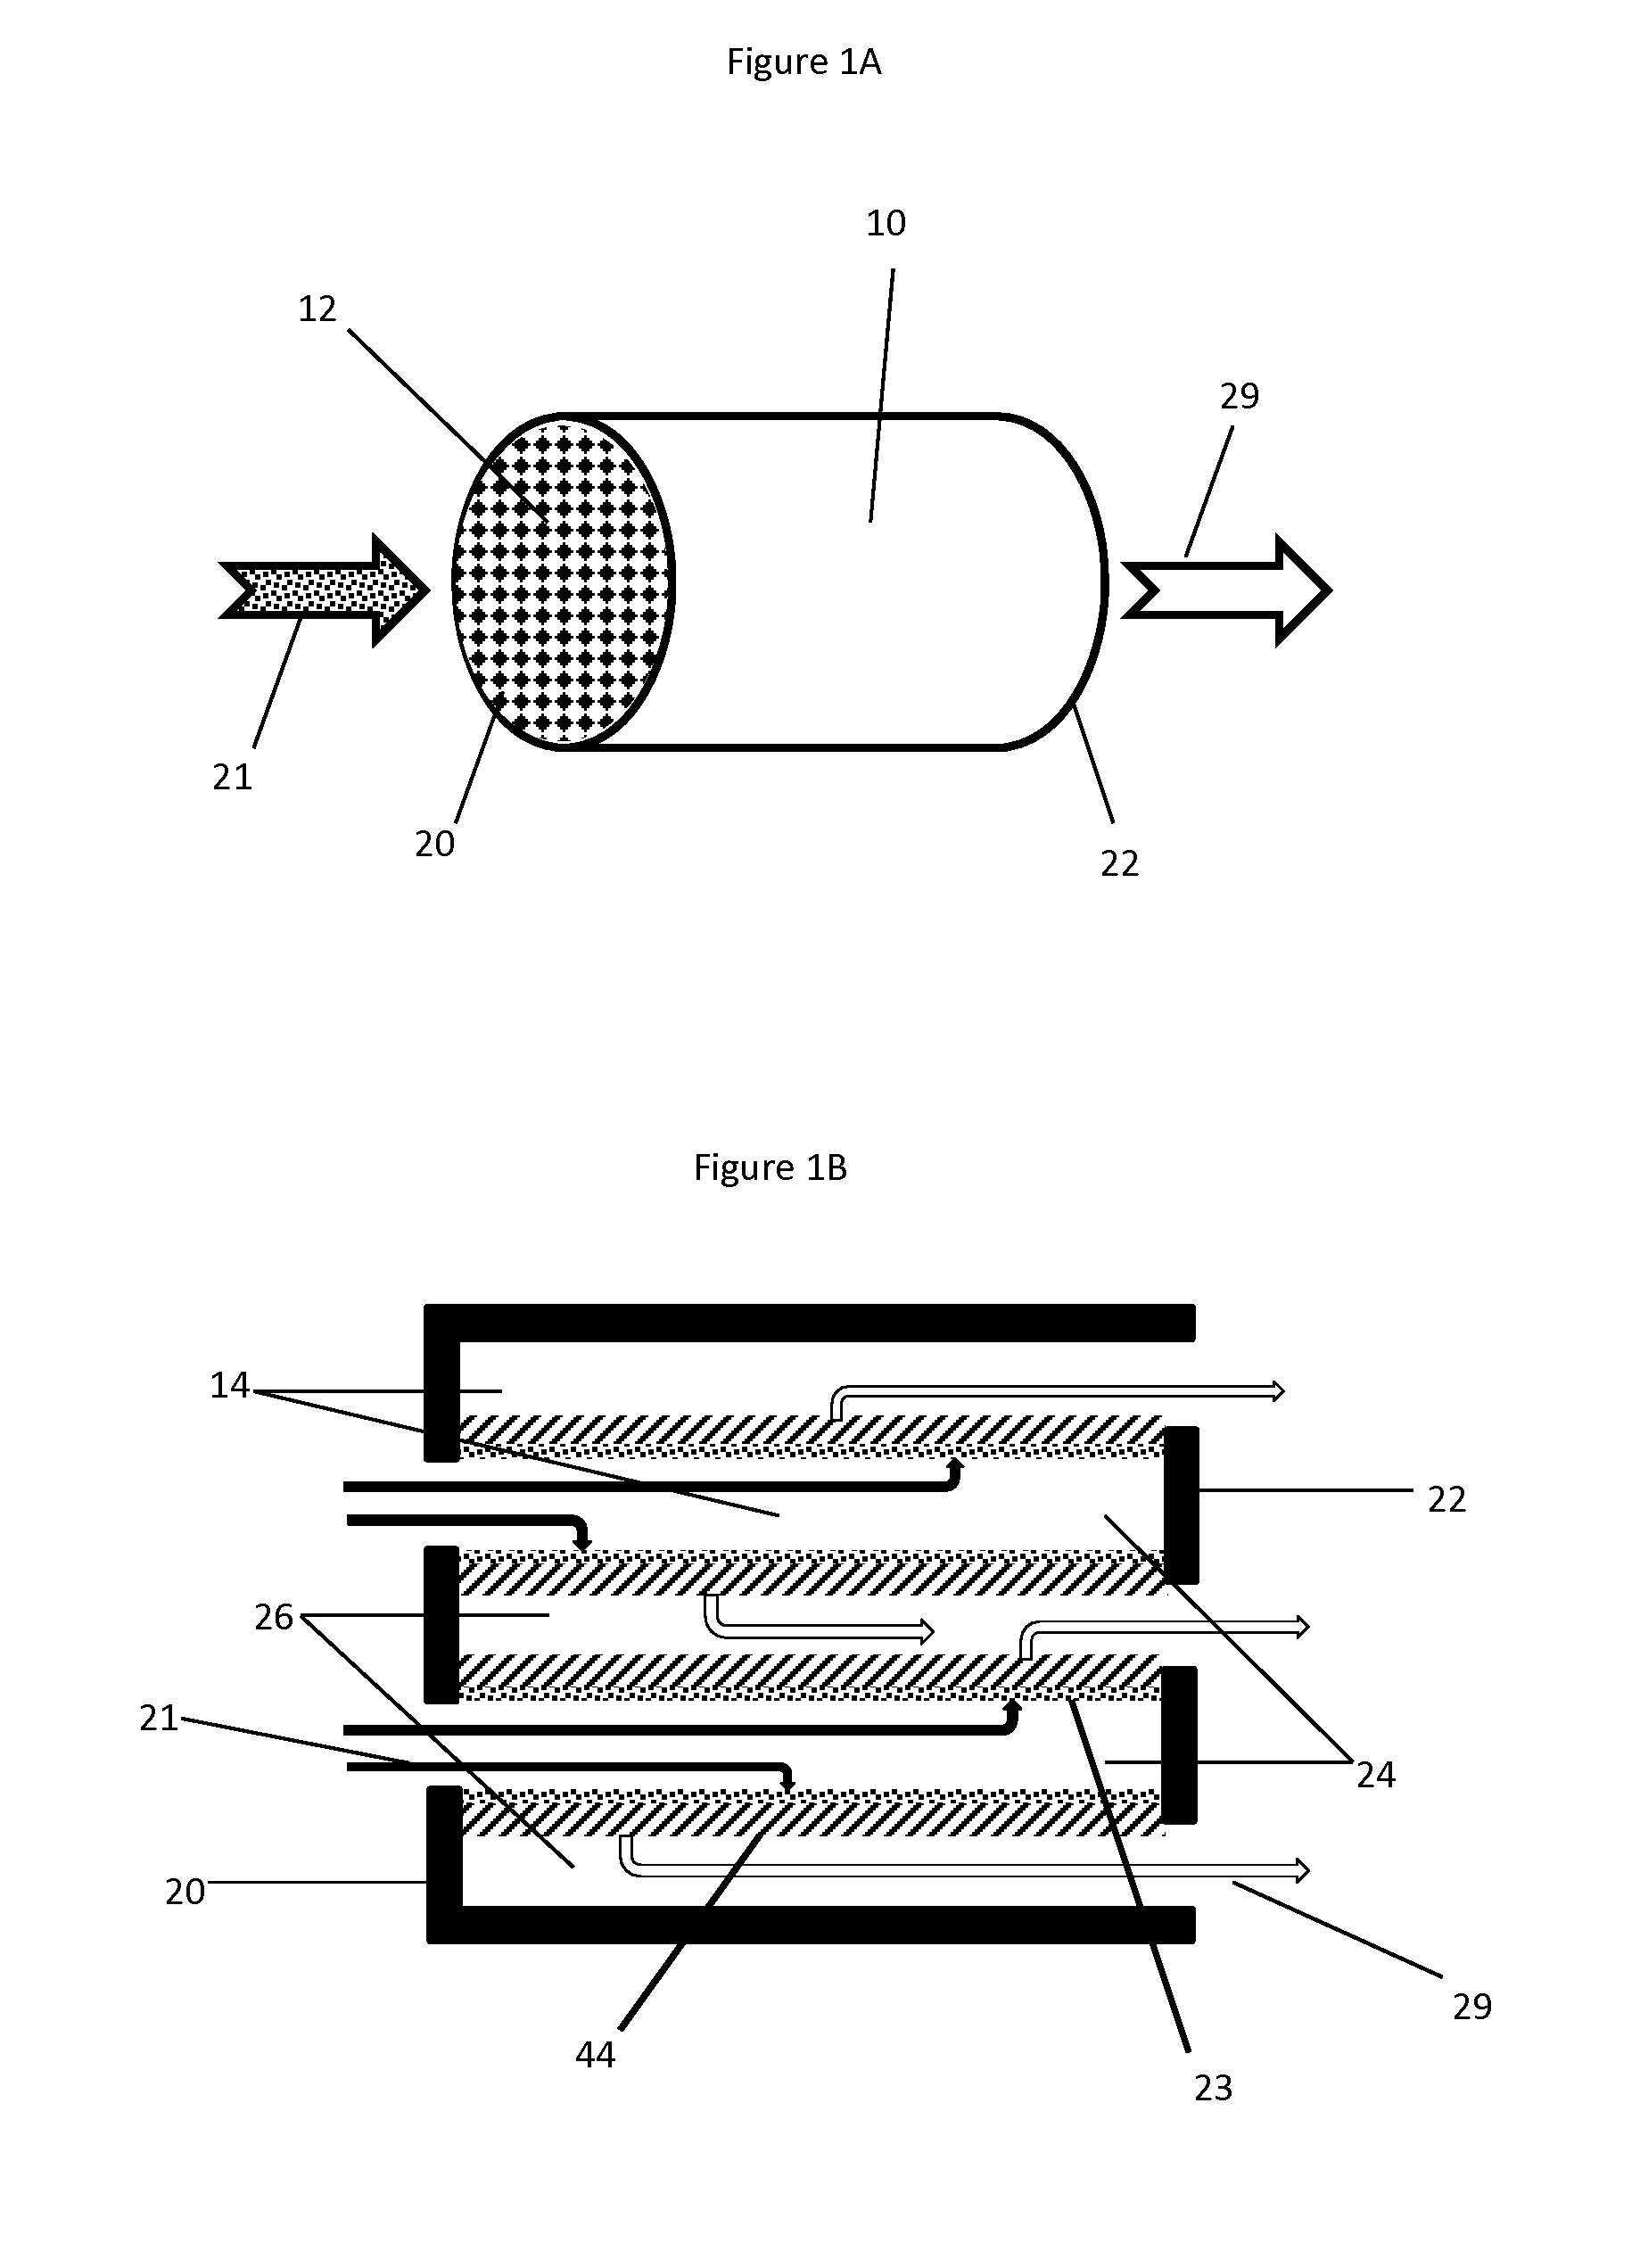 Catalyzed Filter for Treating Exhaust Gas